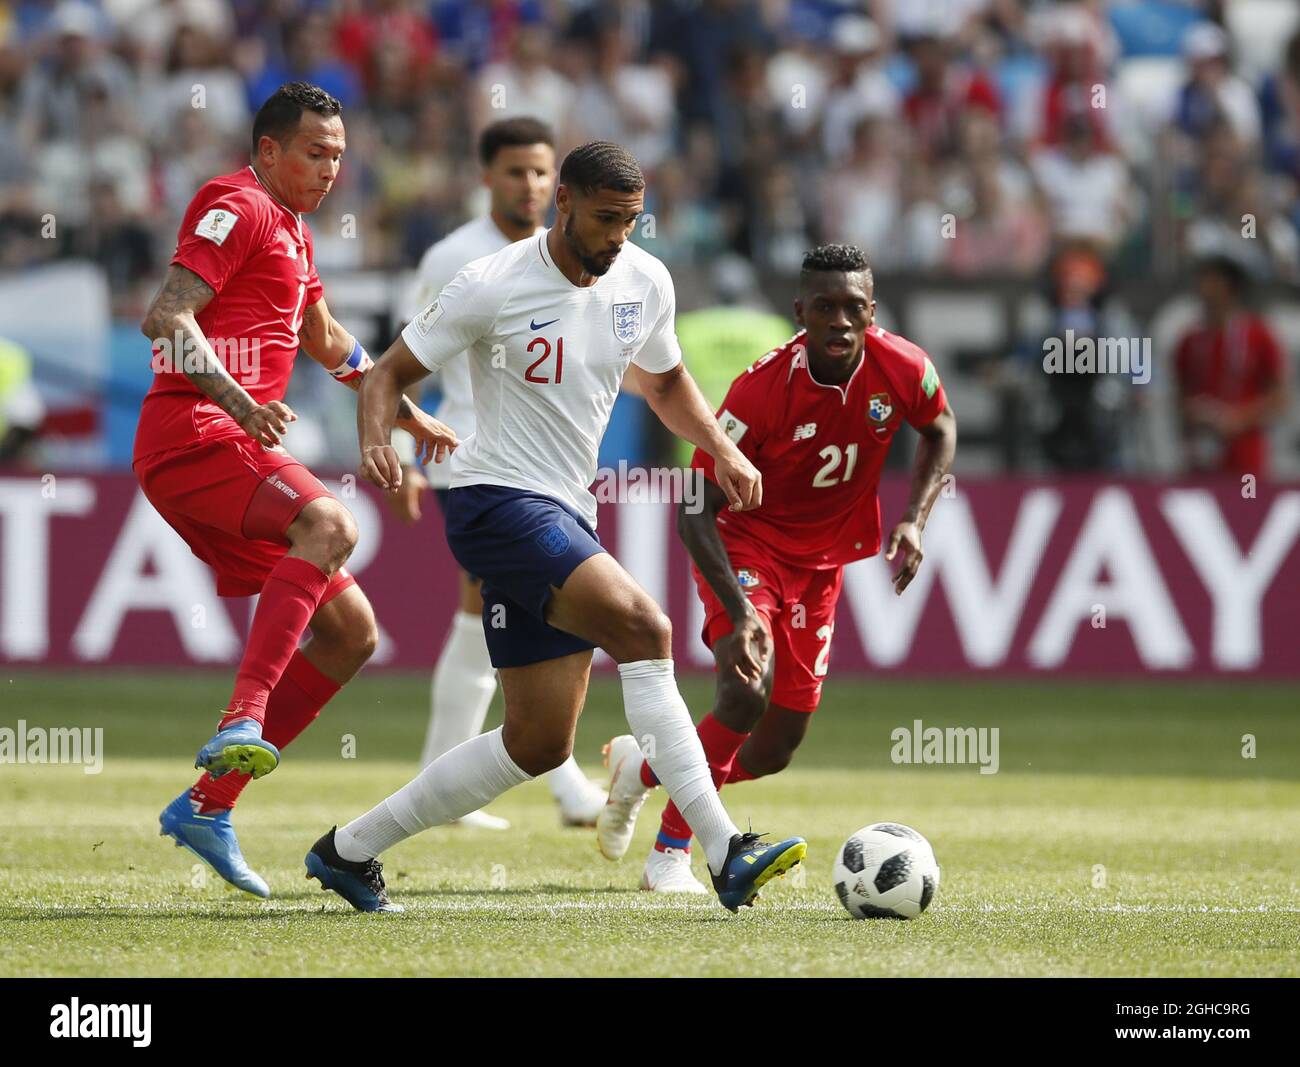 Ruben Loftus-Cheek of England  tackled by Blas Perez of Panama during the FIFA World Cup 2018 Group G match at the Nizhny Novgorod Stadium, Nizhny Novgorod. Picture date 24th June 2018. Picture credit should read: David Klein/Sportimage via PA Images Stock Photo